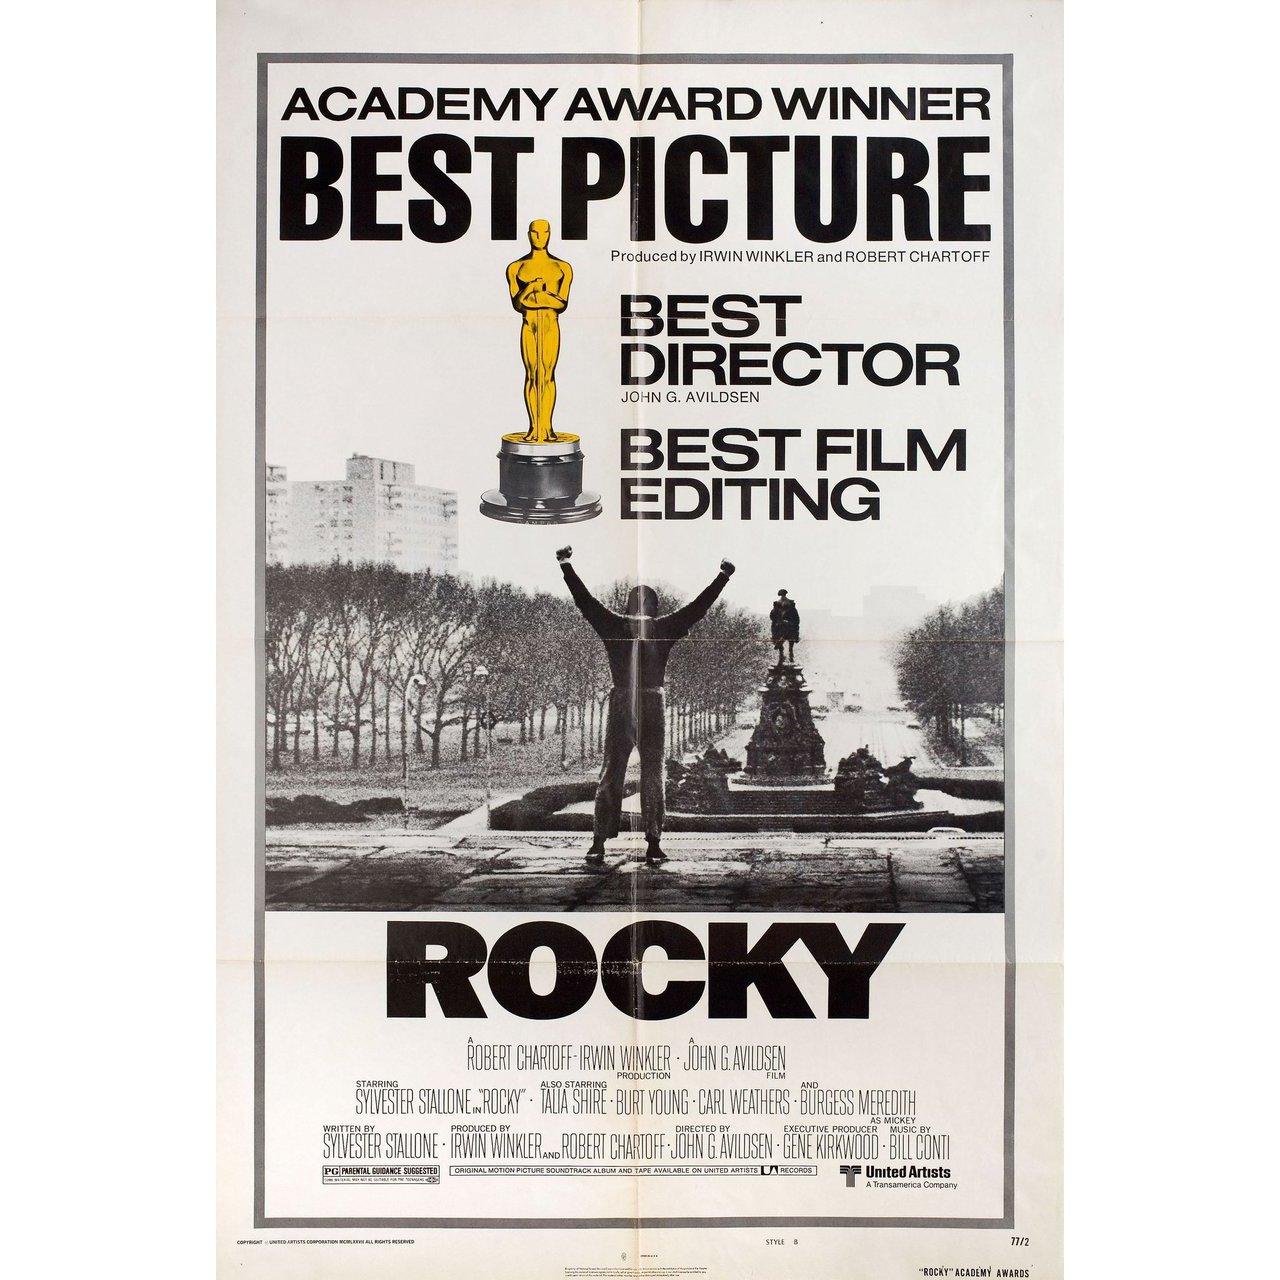 Original 1977 U.S. one sheet poster for the film Rocky directed by John G. Avildsen with Sylvester Stallone / Talia Shire / Burt Young / Carl Weathers. Very Good condition, folded. Many original posters were issued folded or were subsequently